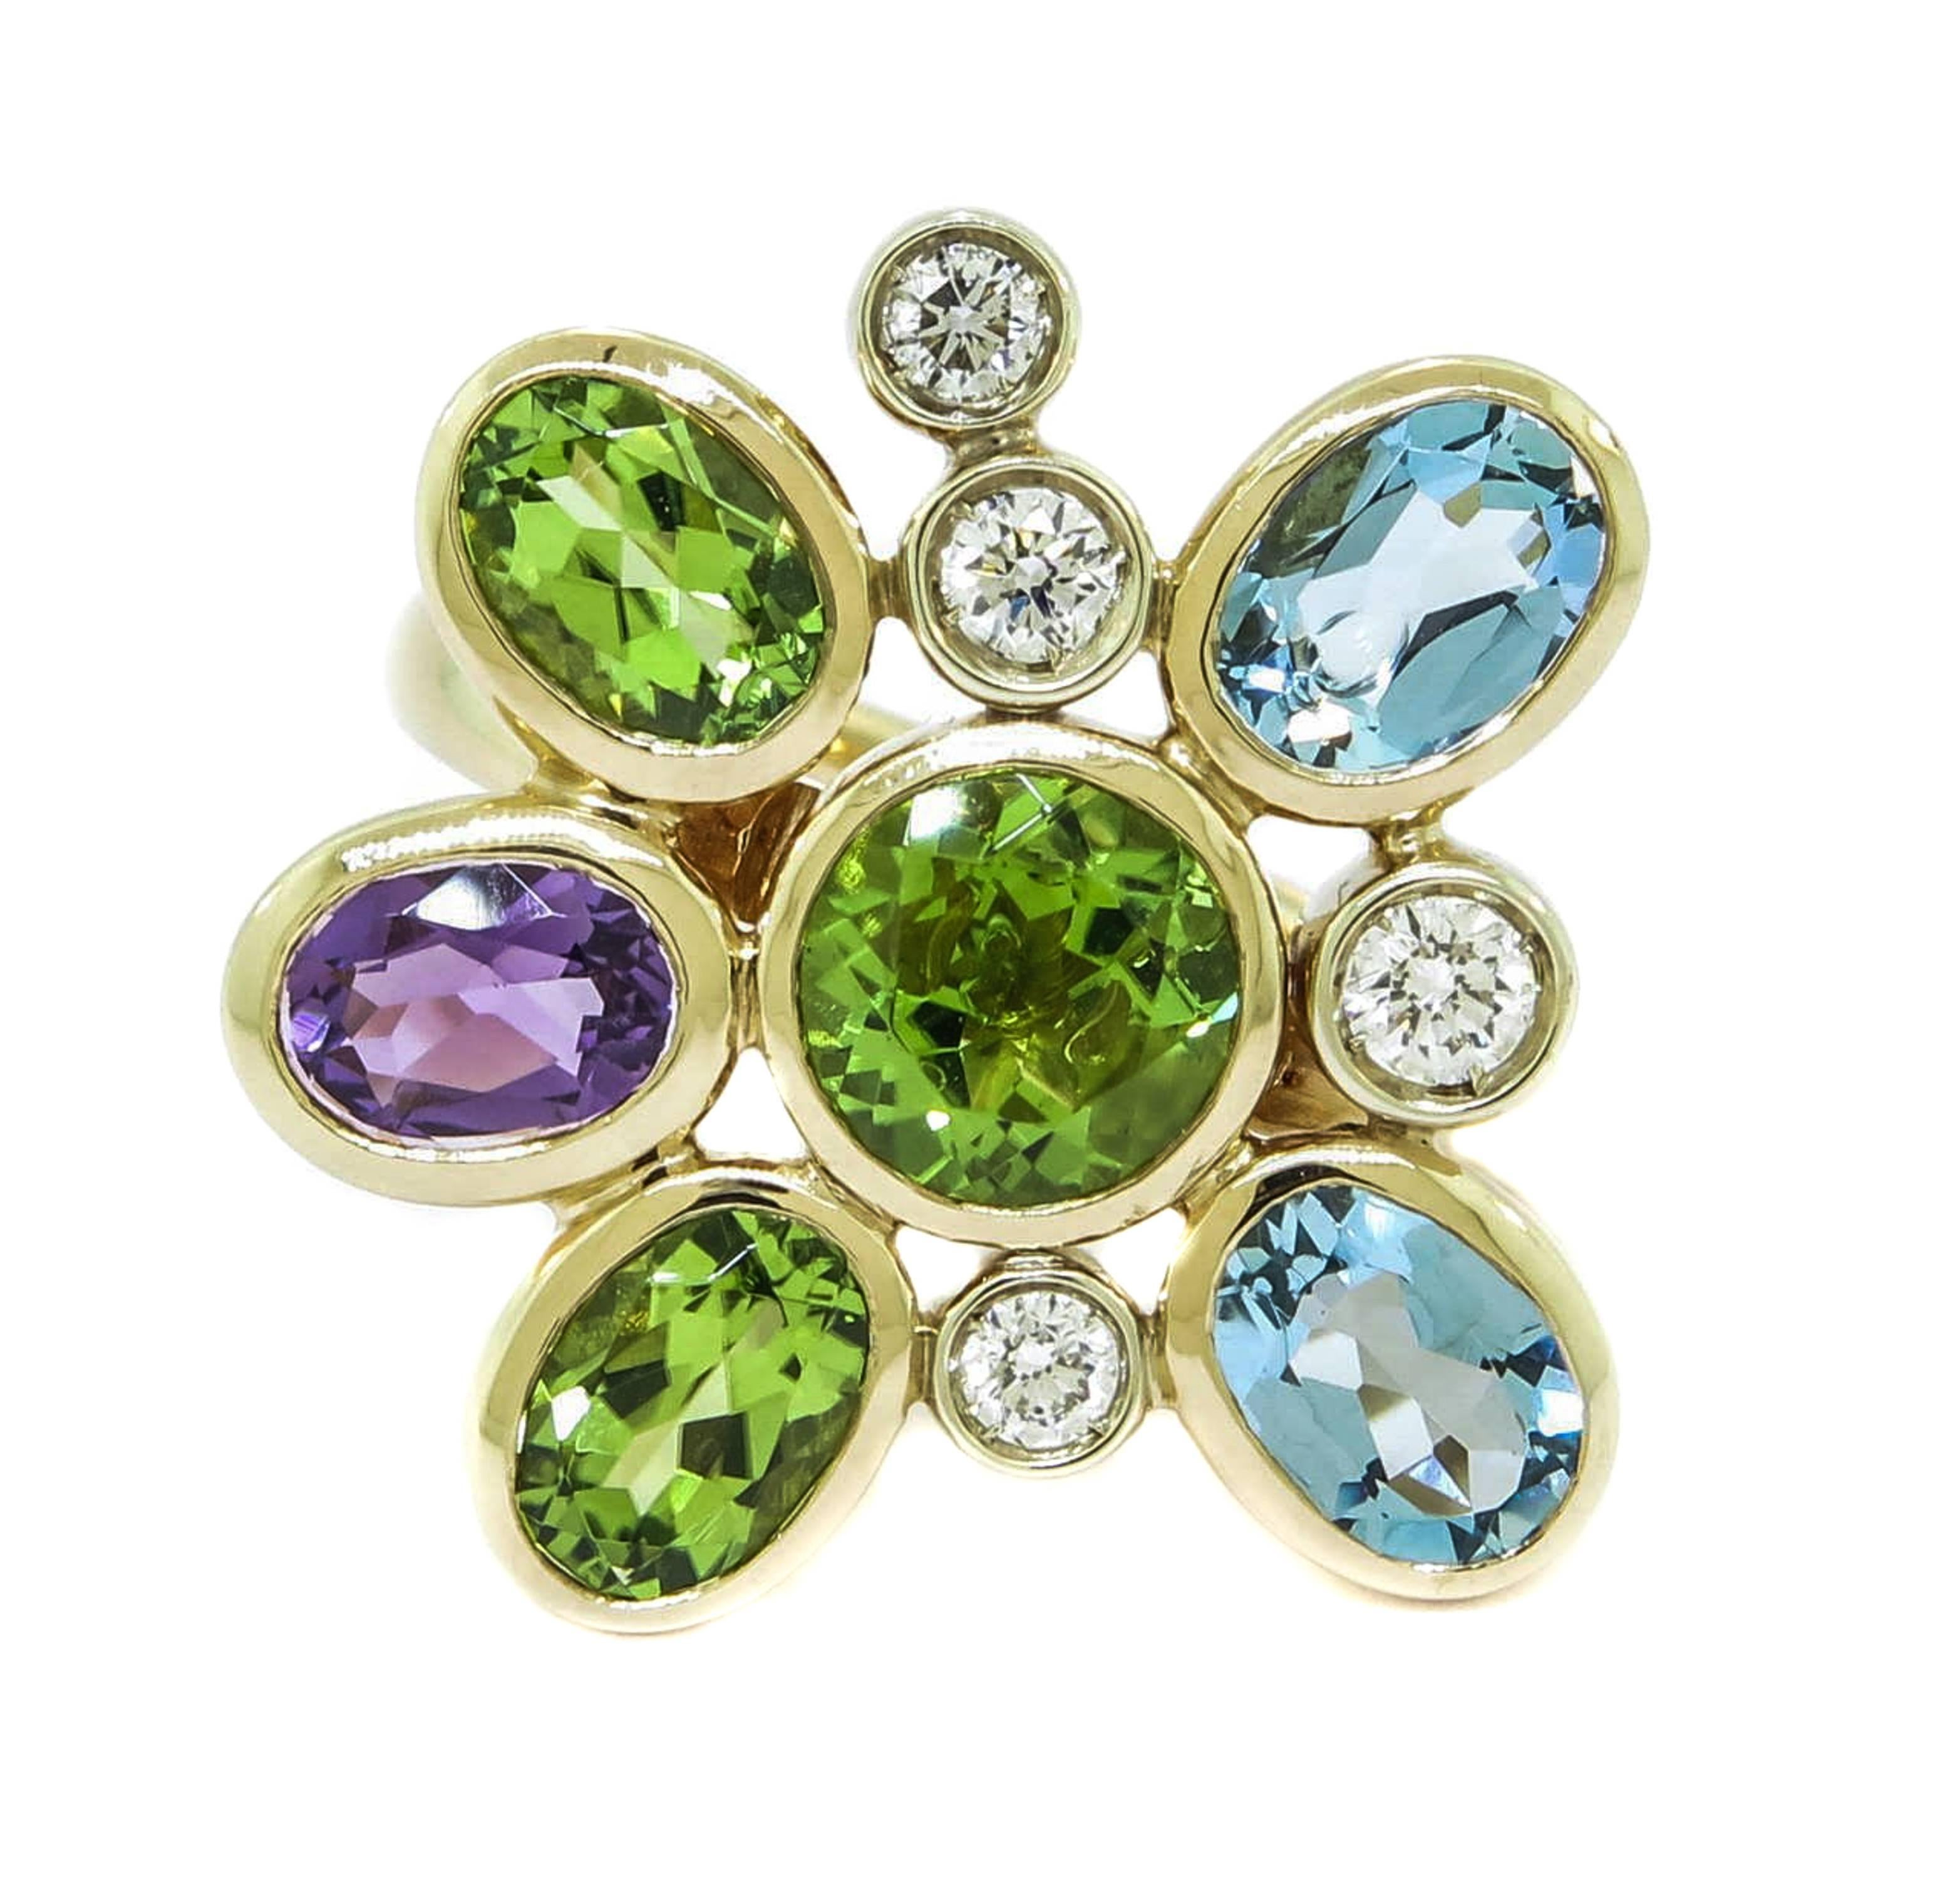 Unique 18 karat yellow gold flower ring featuring diamonds, peridot, aquamarine and amethyst.  Italian craftsmanship shines on this ring by Manfredi of Italy, and is sure to put a smile on your face every time you wear it!